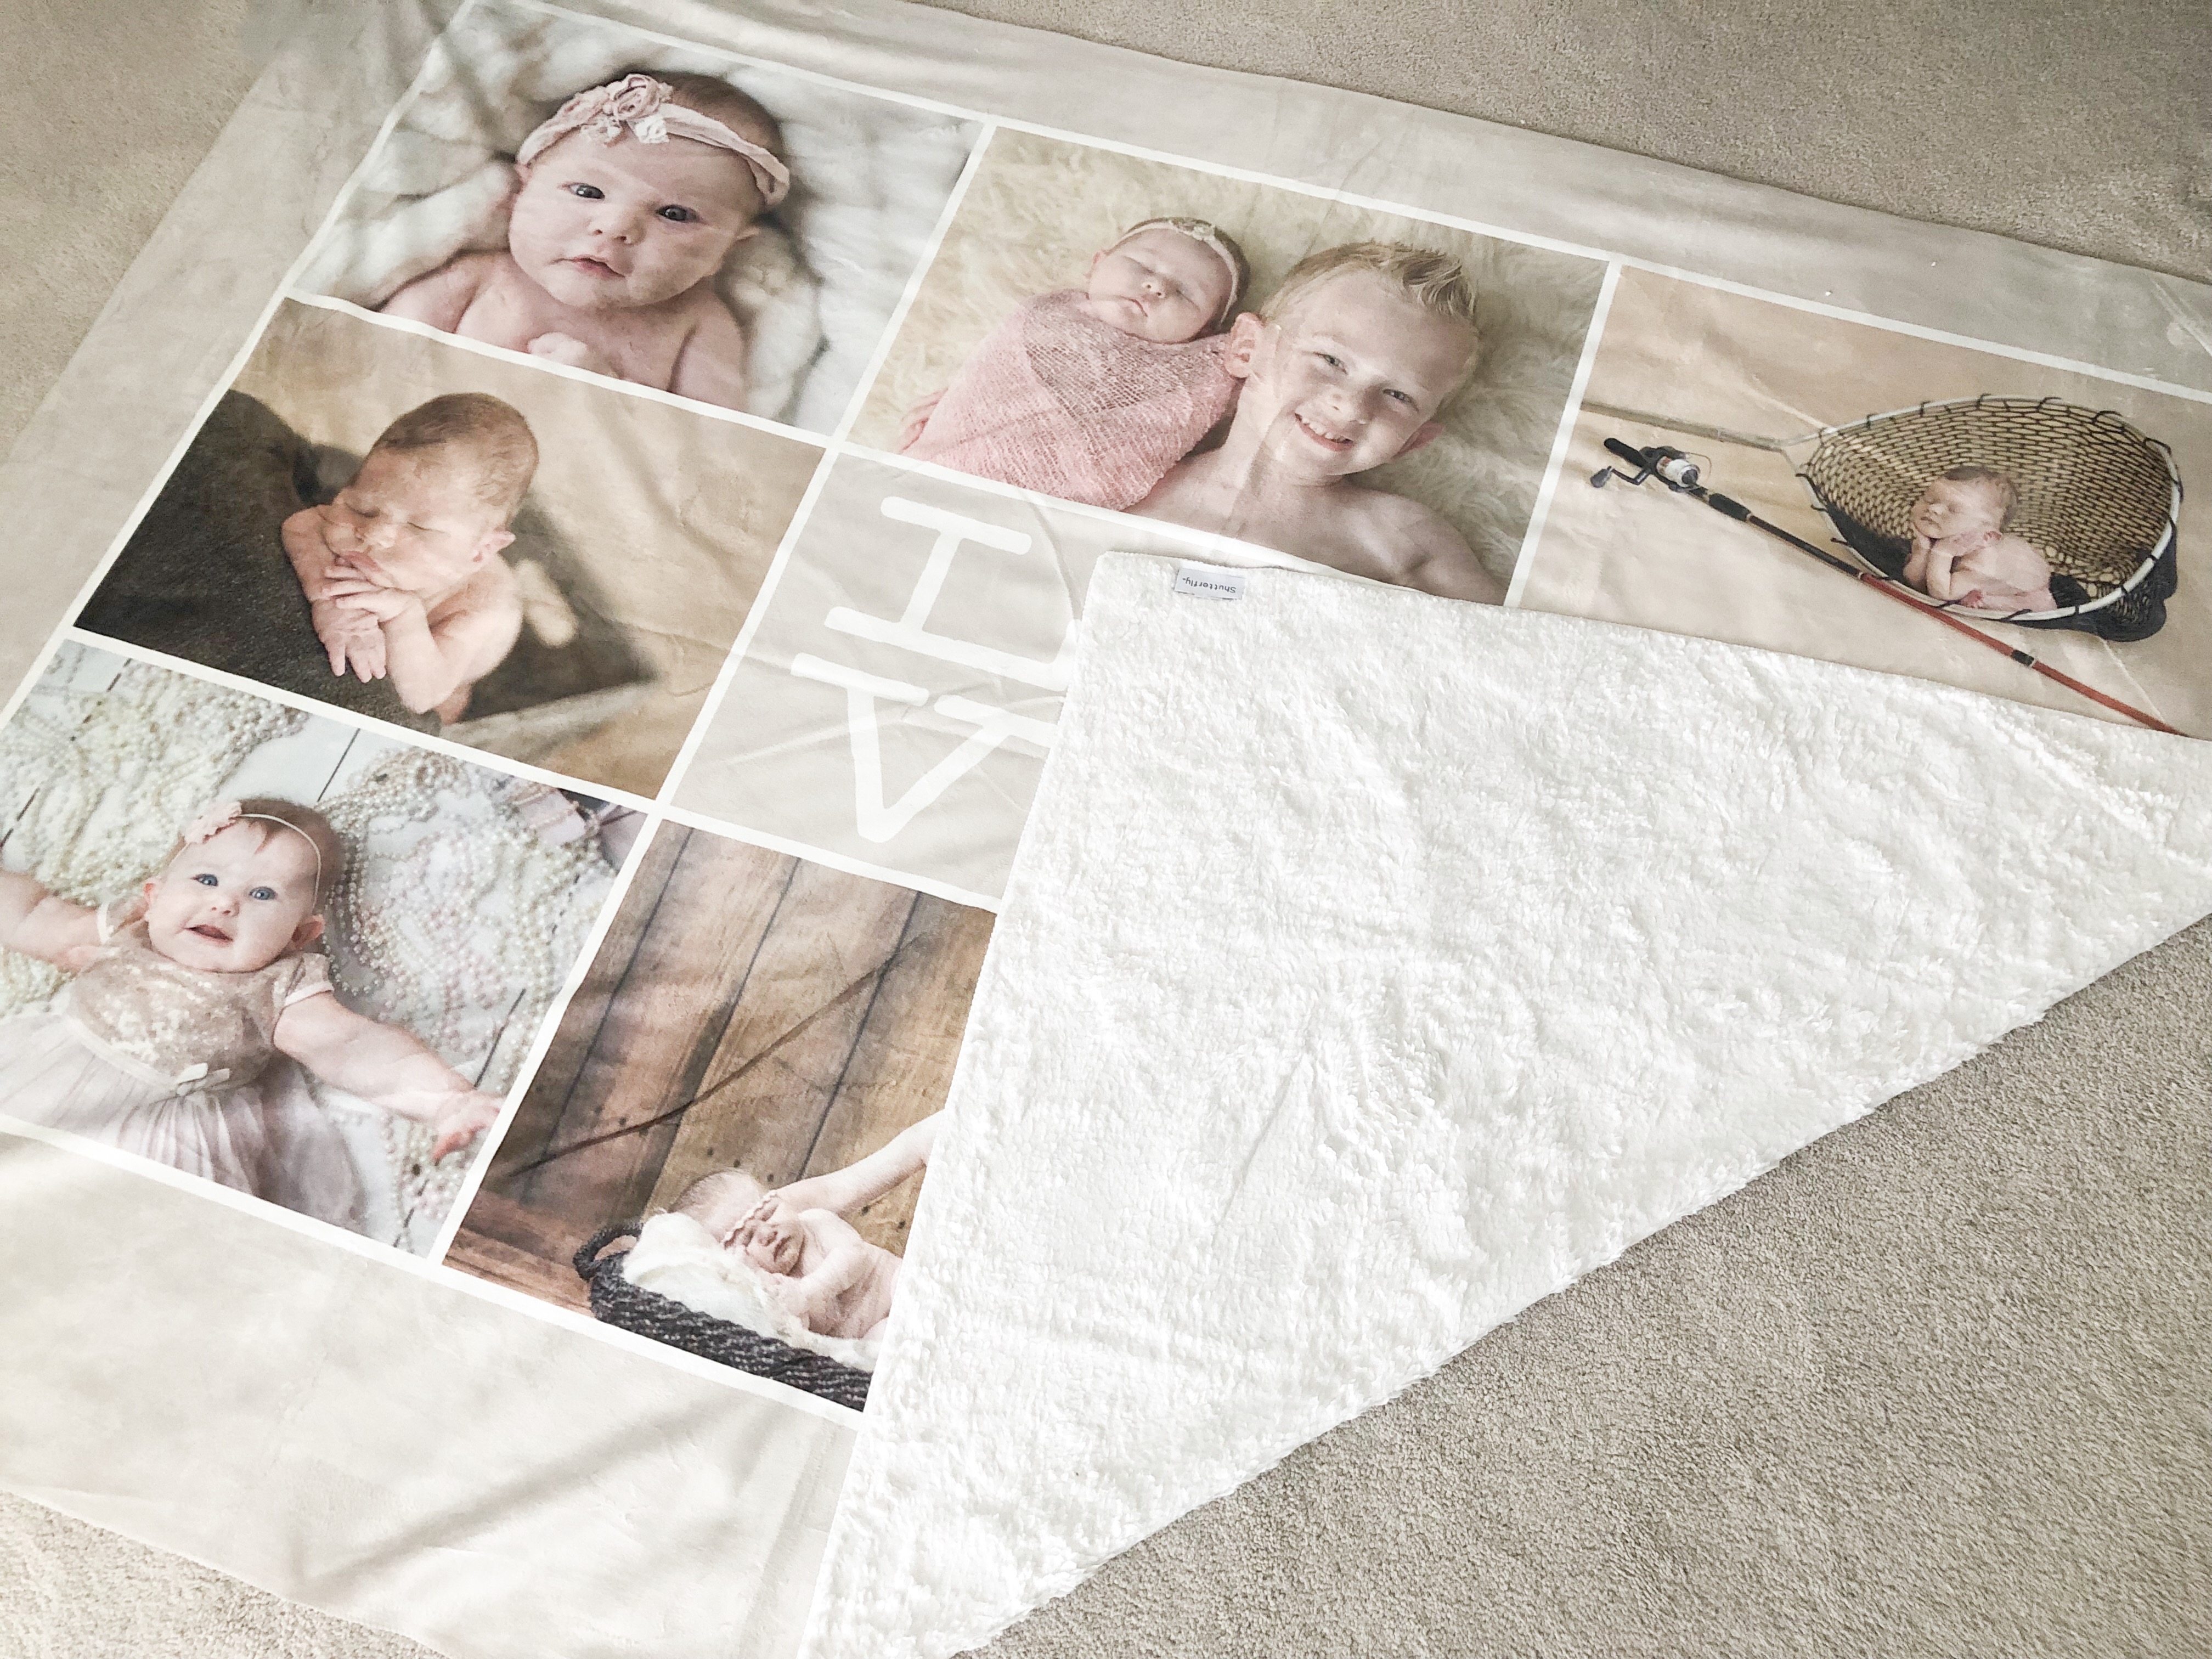 Custom Blanket from Shutterfly on livin life with style 